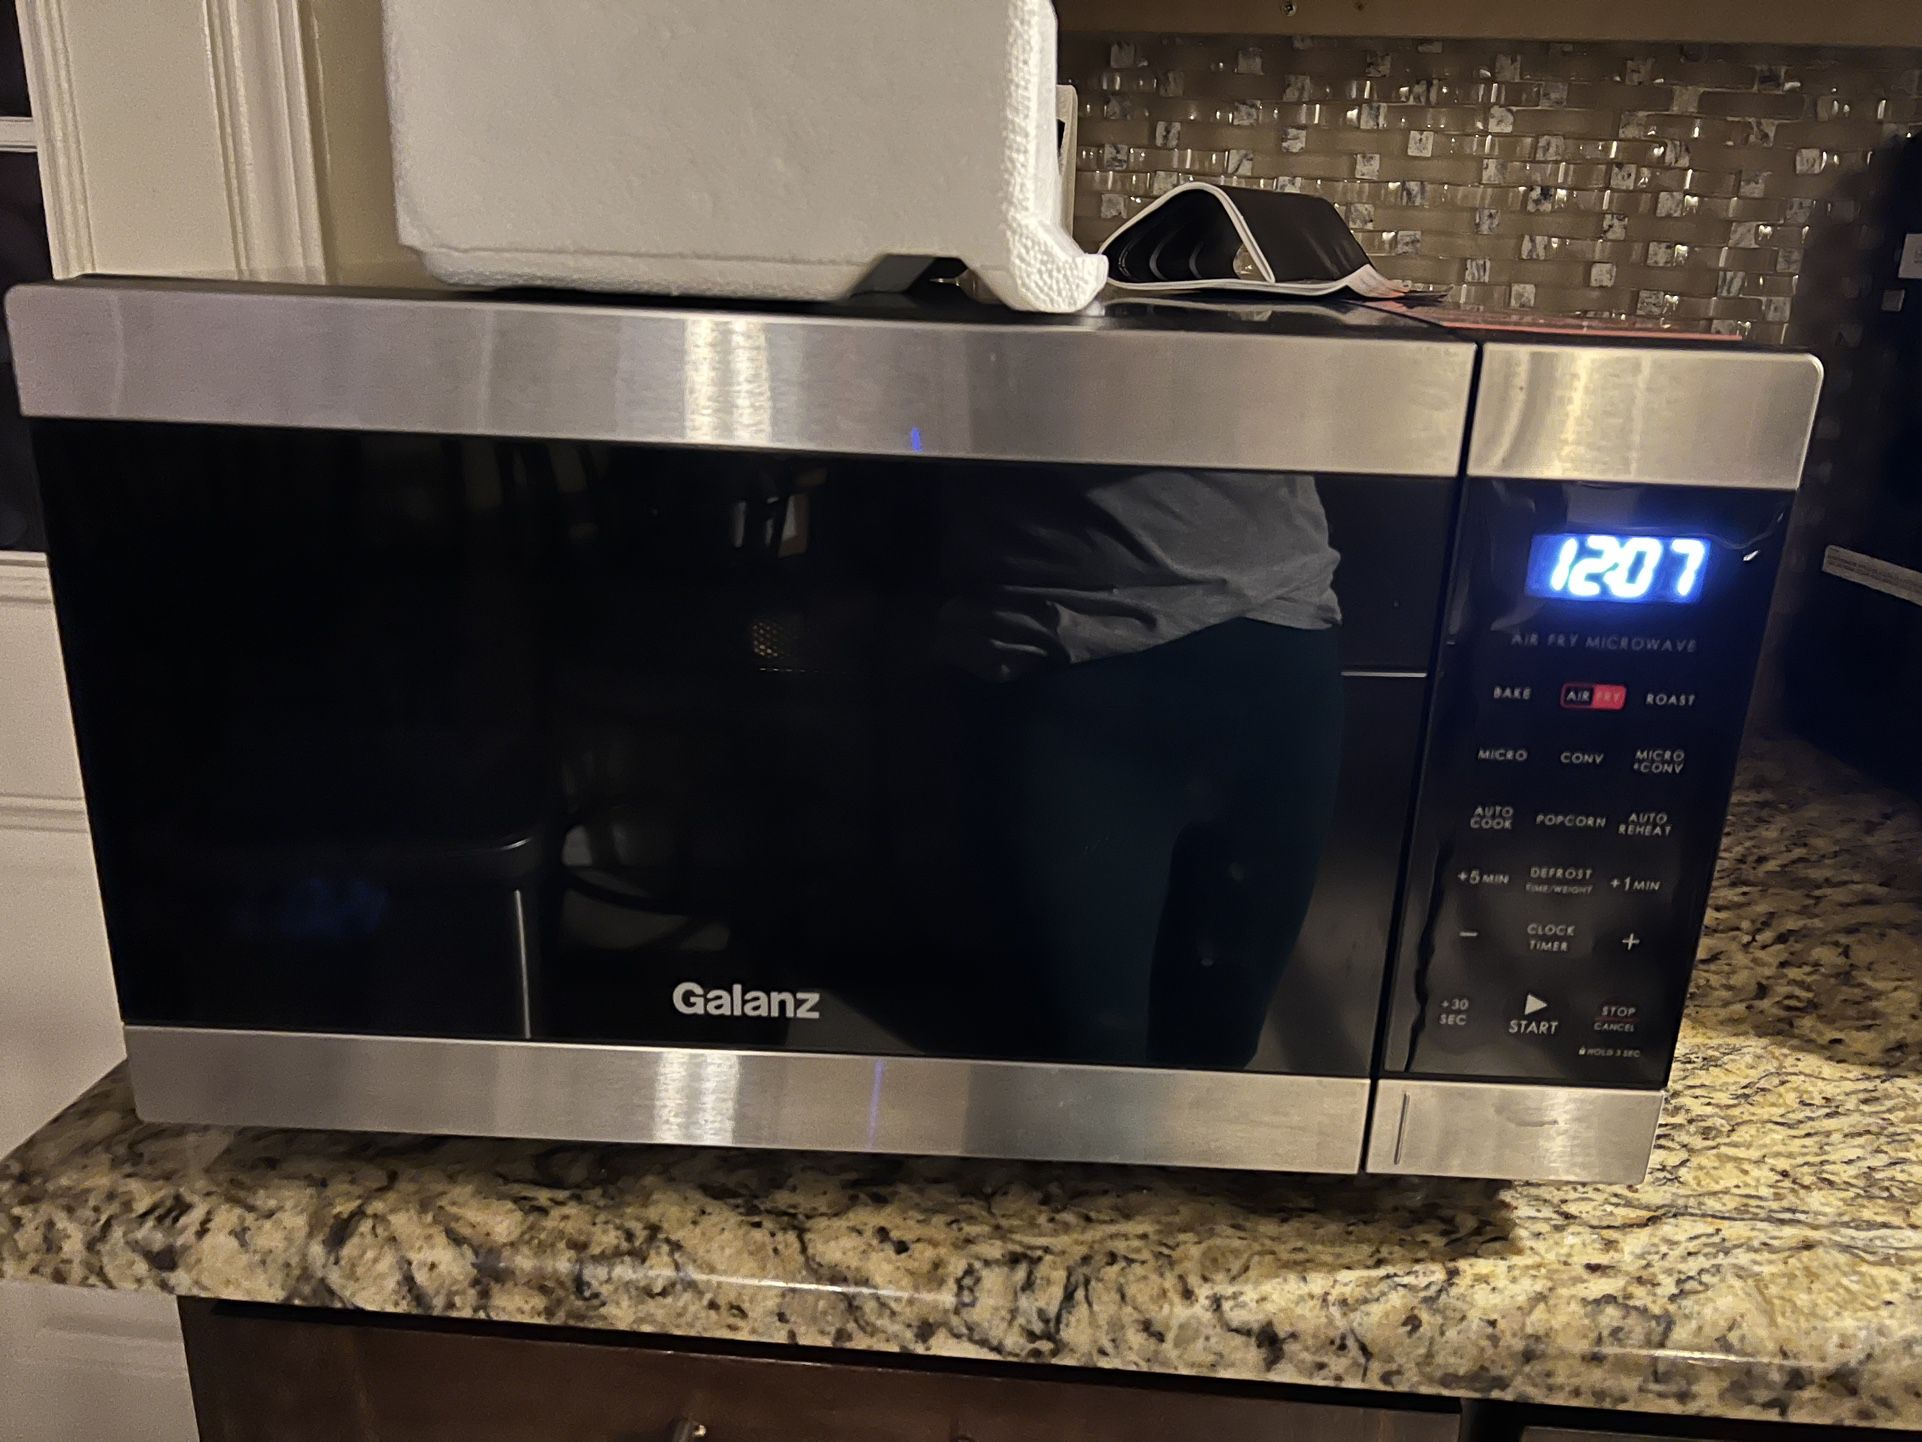 GALANZ STAINLESS NEW MICROWAVE 3-1 